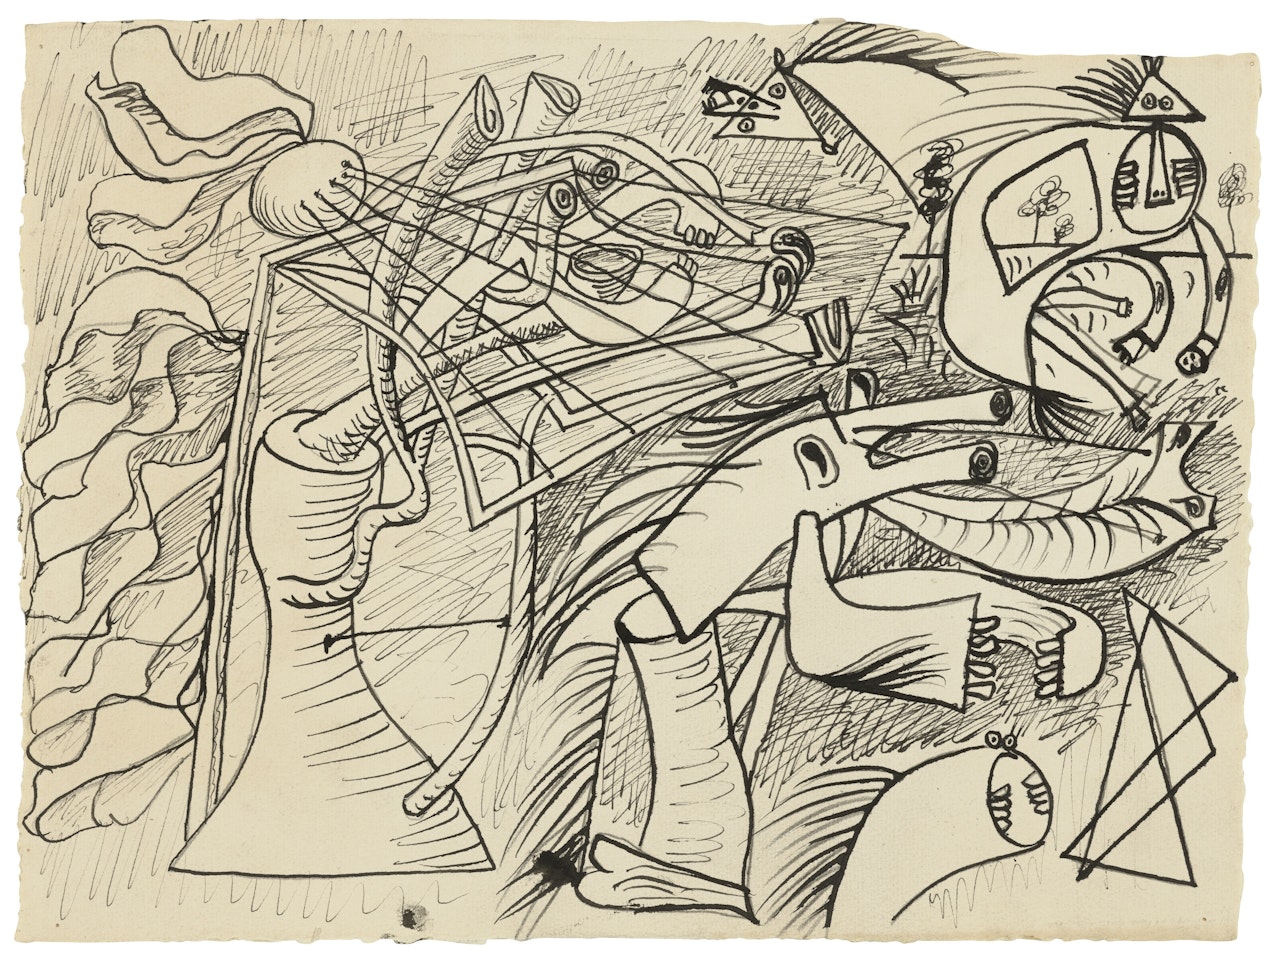 Composition by Pablo Picasso